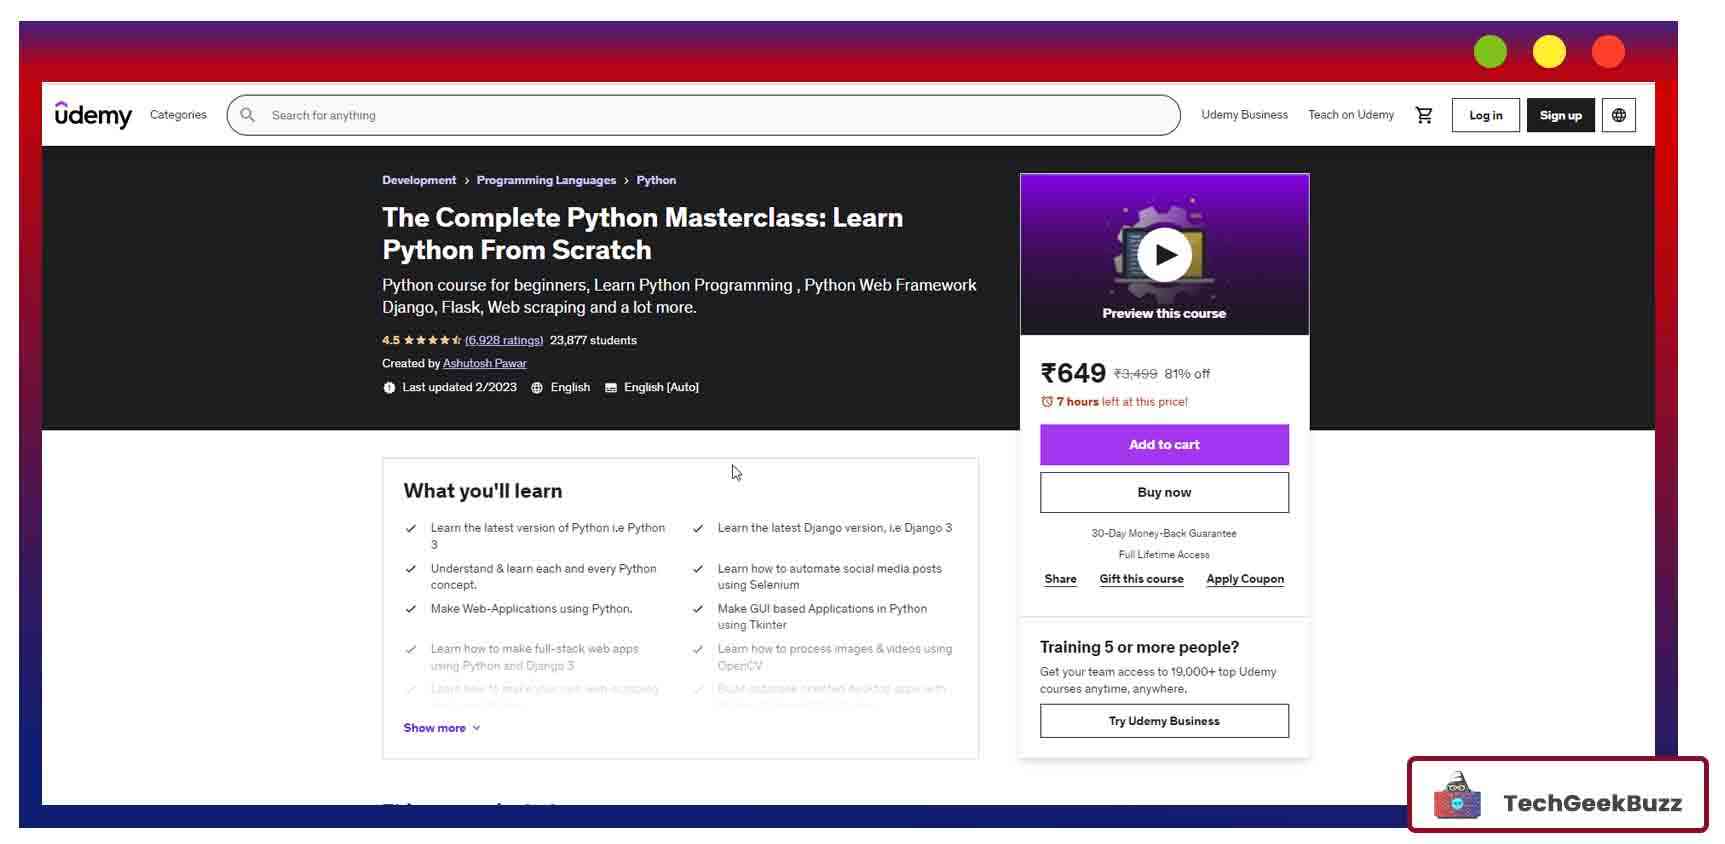 The Complete Python Masterclass: Learn Python From Scratch Complete Python Masterclass